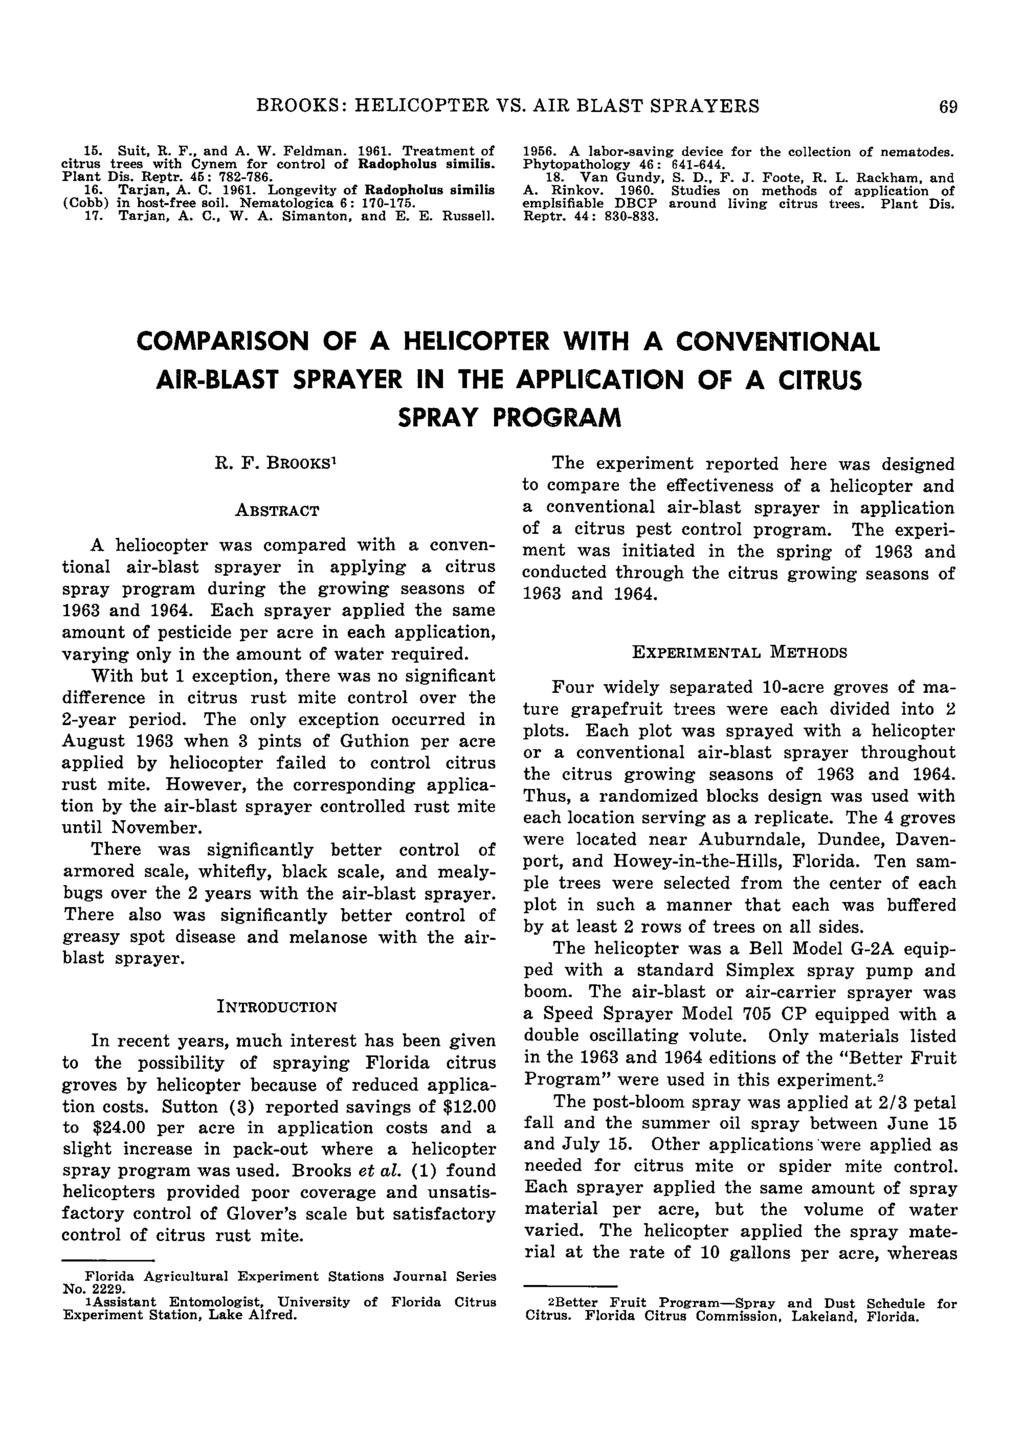 BROOKS: HELICOPTER VS. AIR BLAST SPRAYERS 69 5. Suit, R. F., and A. W. Feldman. 96. Treatment of citrus trees with Cynem for control of Radopholus similis. Plant Dis. Reptr. 45: 782-786. 6. Tarjan, A.